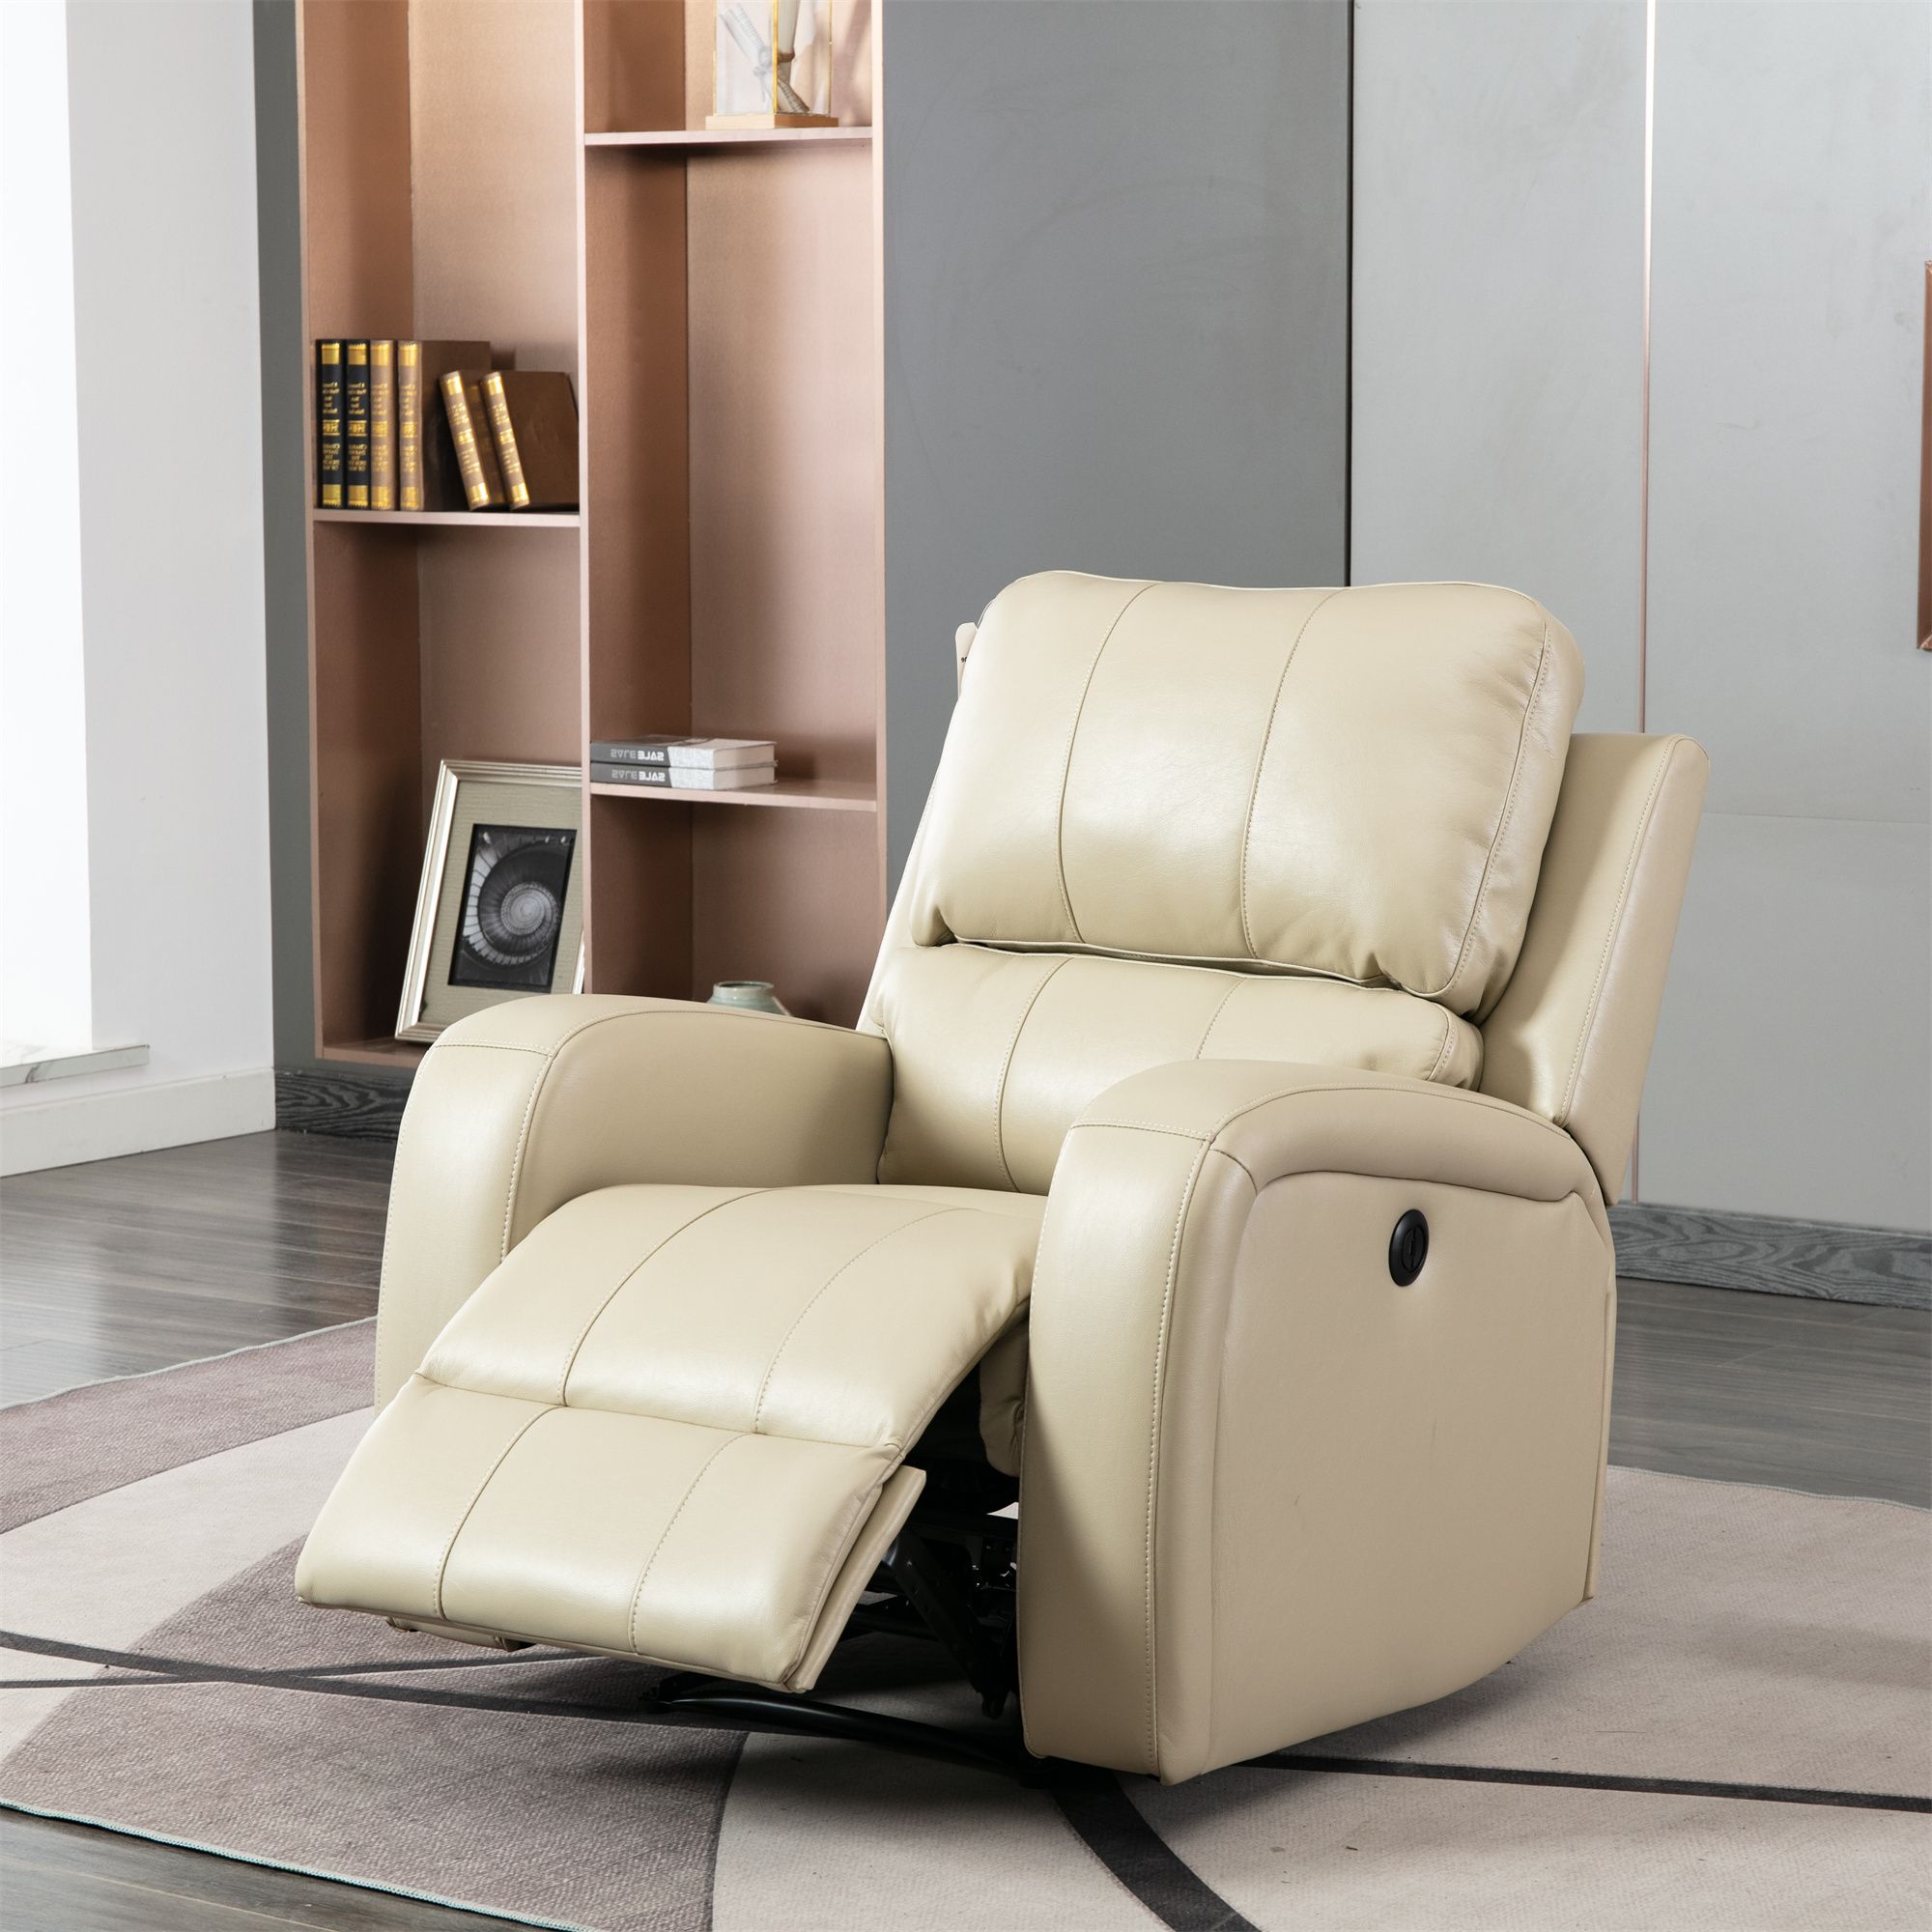 2017 Power Lift Chair Electric Recliner Sofa For Elderly,comfortable Air With Black Faux Leather Usb Charging Ottomans (View 9 of 10)